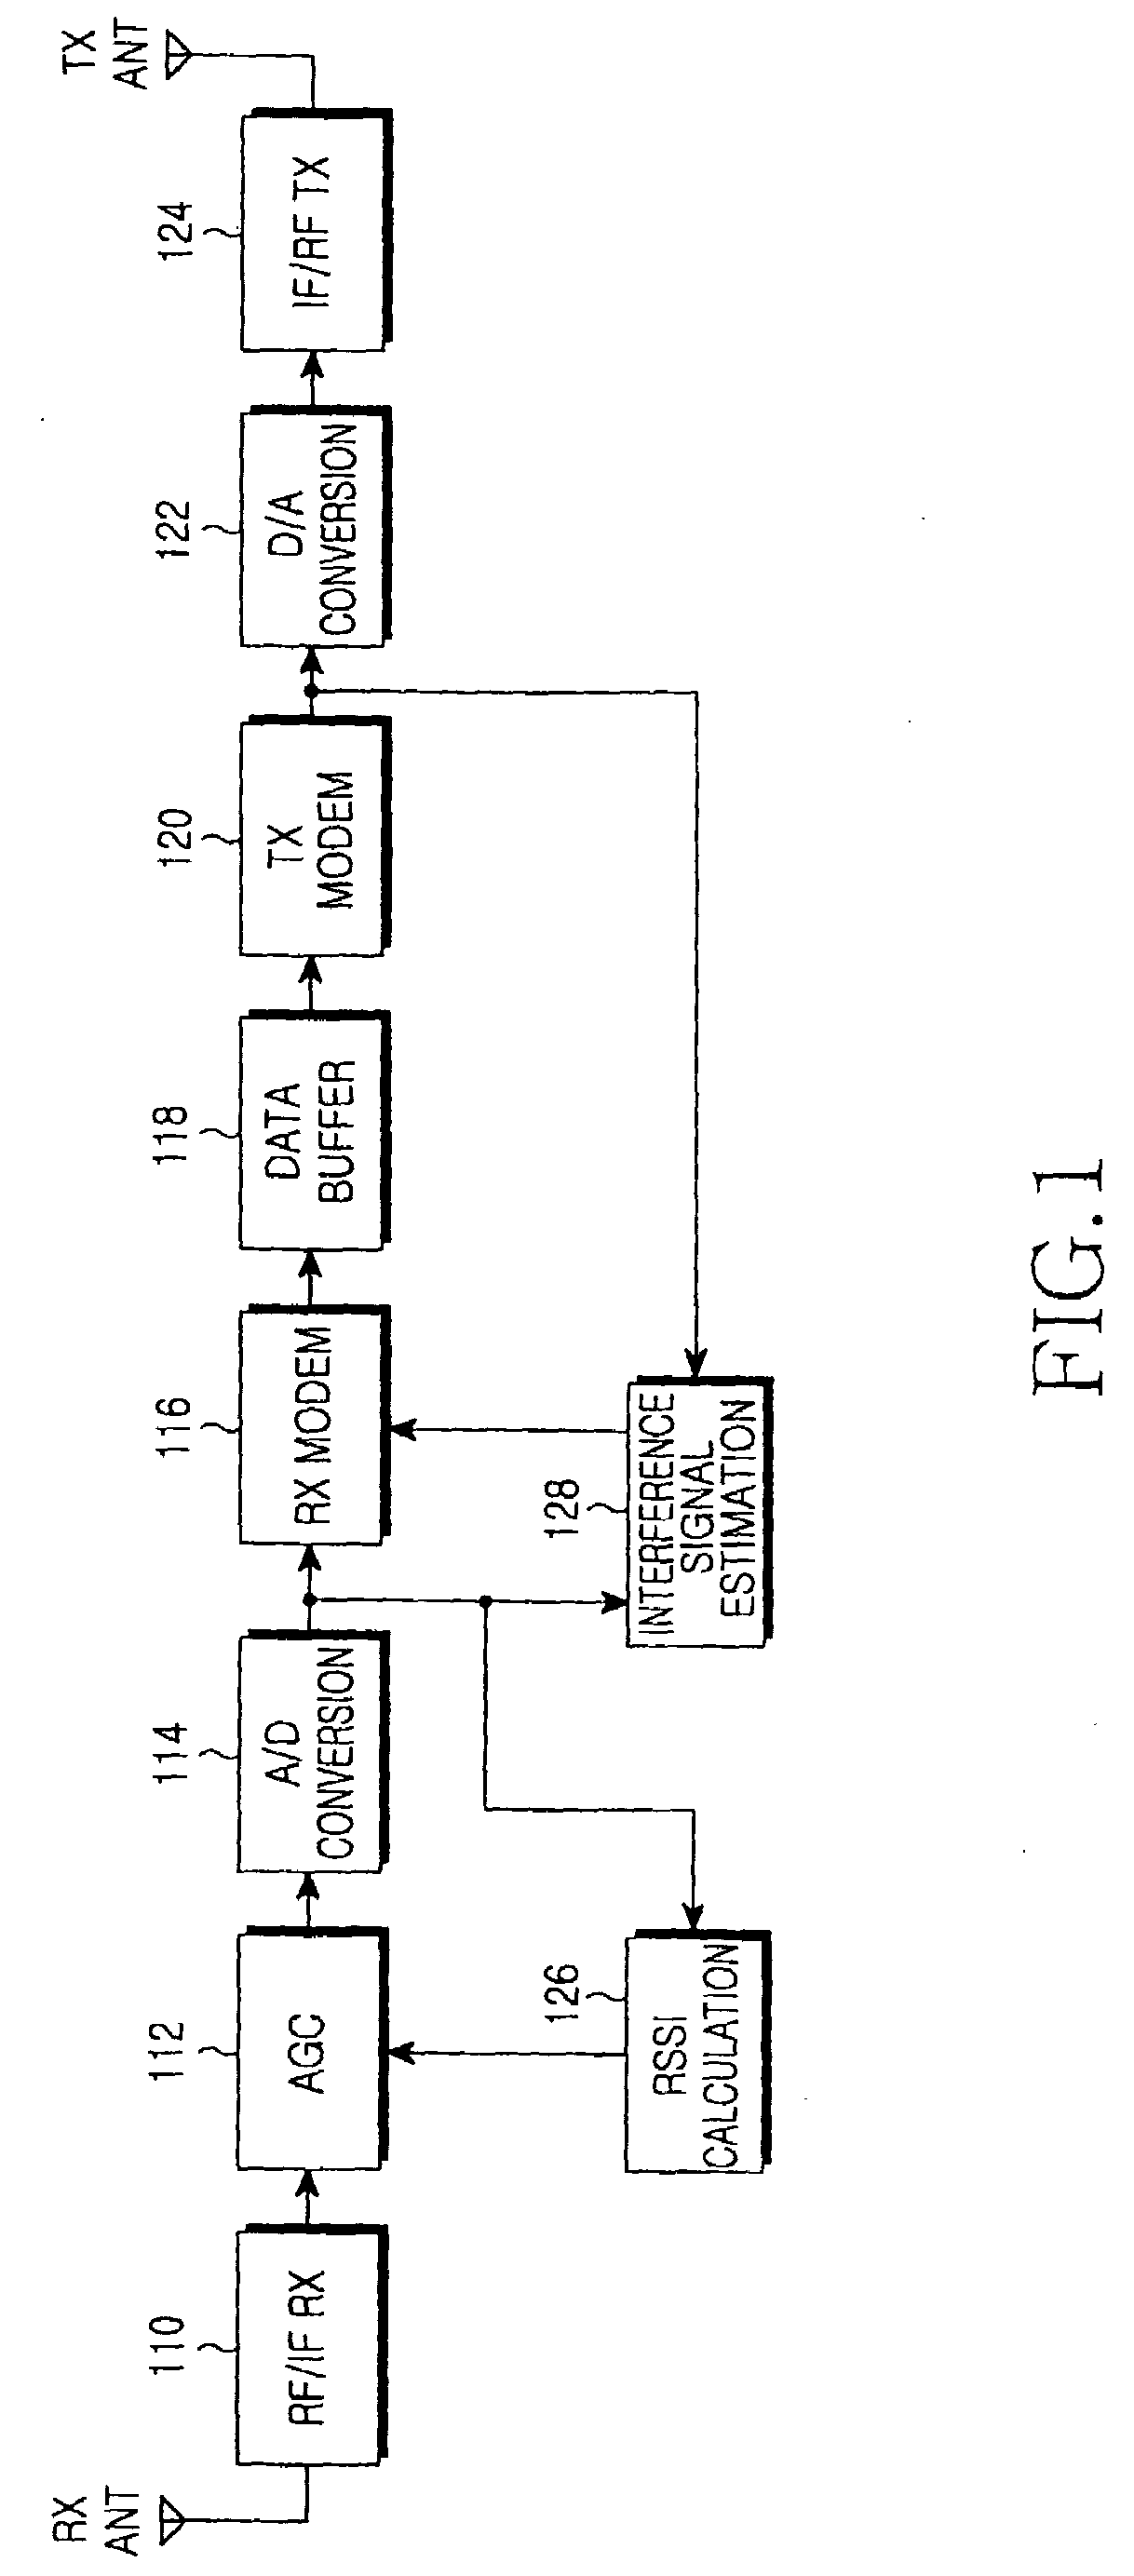 Automatic gain control apparatus and method in a wireless communication system